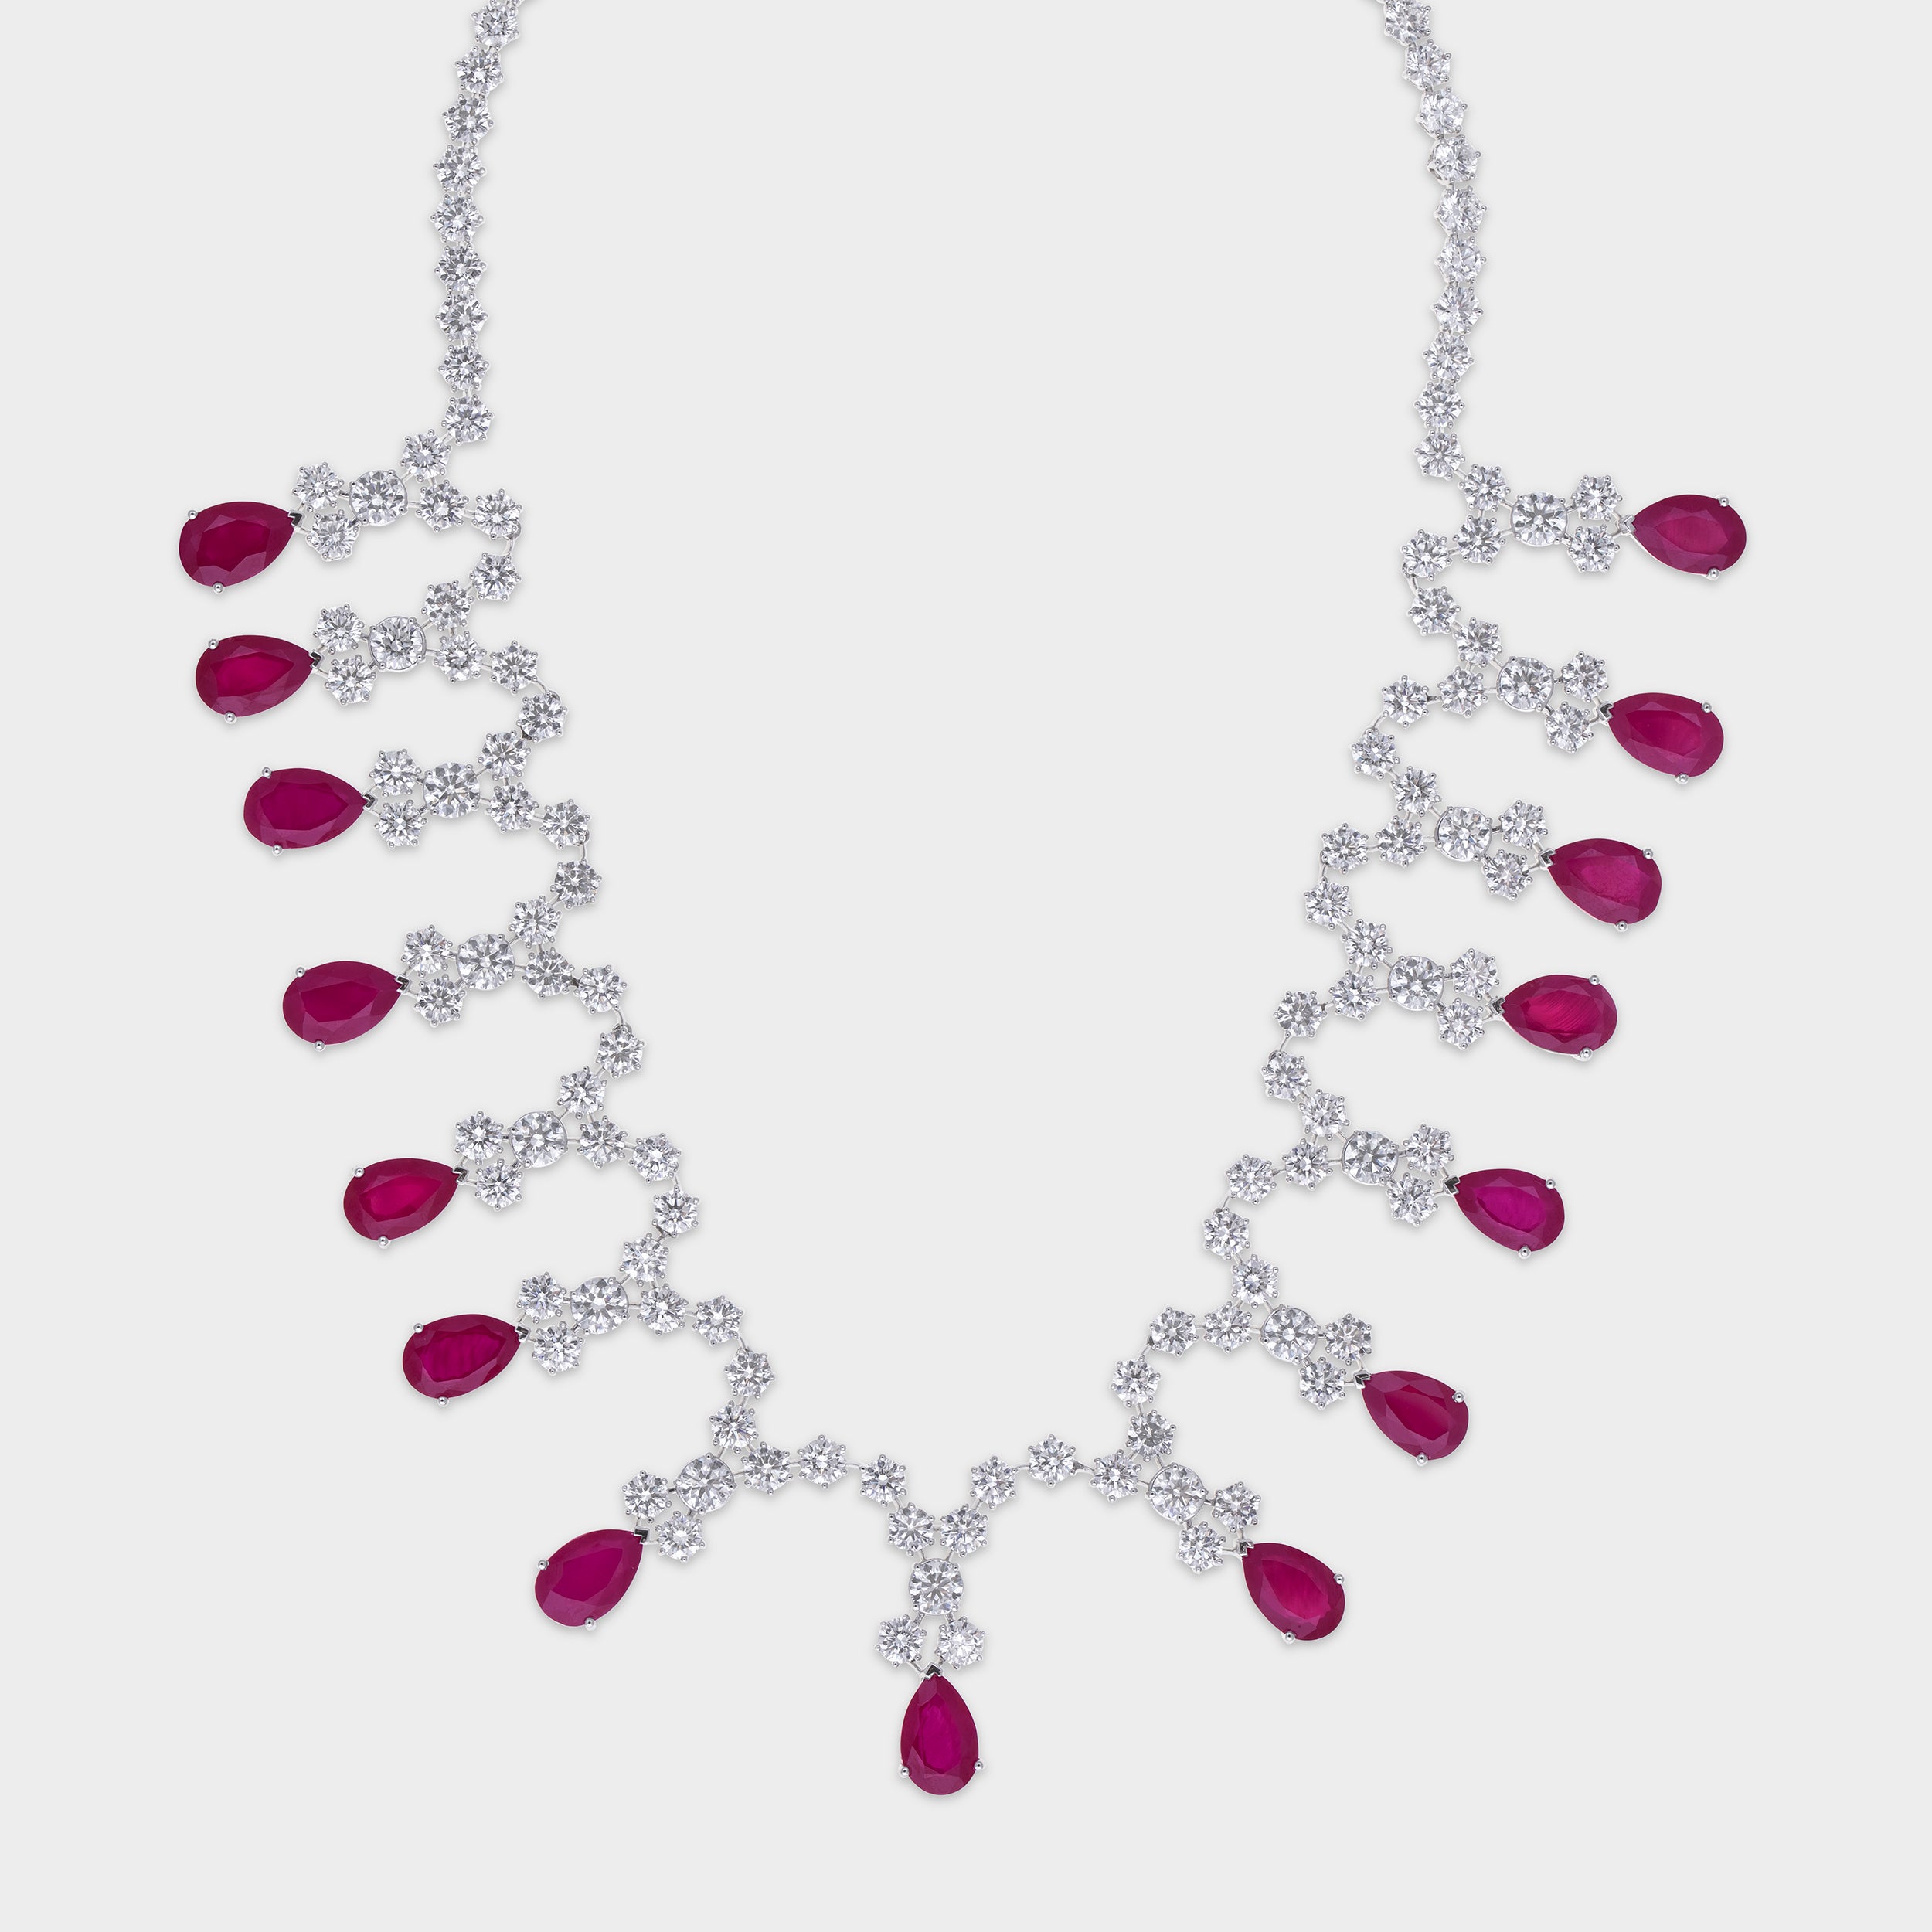 Ethereal Fusion: Fancy White Gold Lab Grown Solitaire Diamond Necklace with Red Gem | SKU : 0019801551